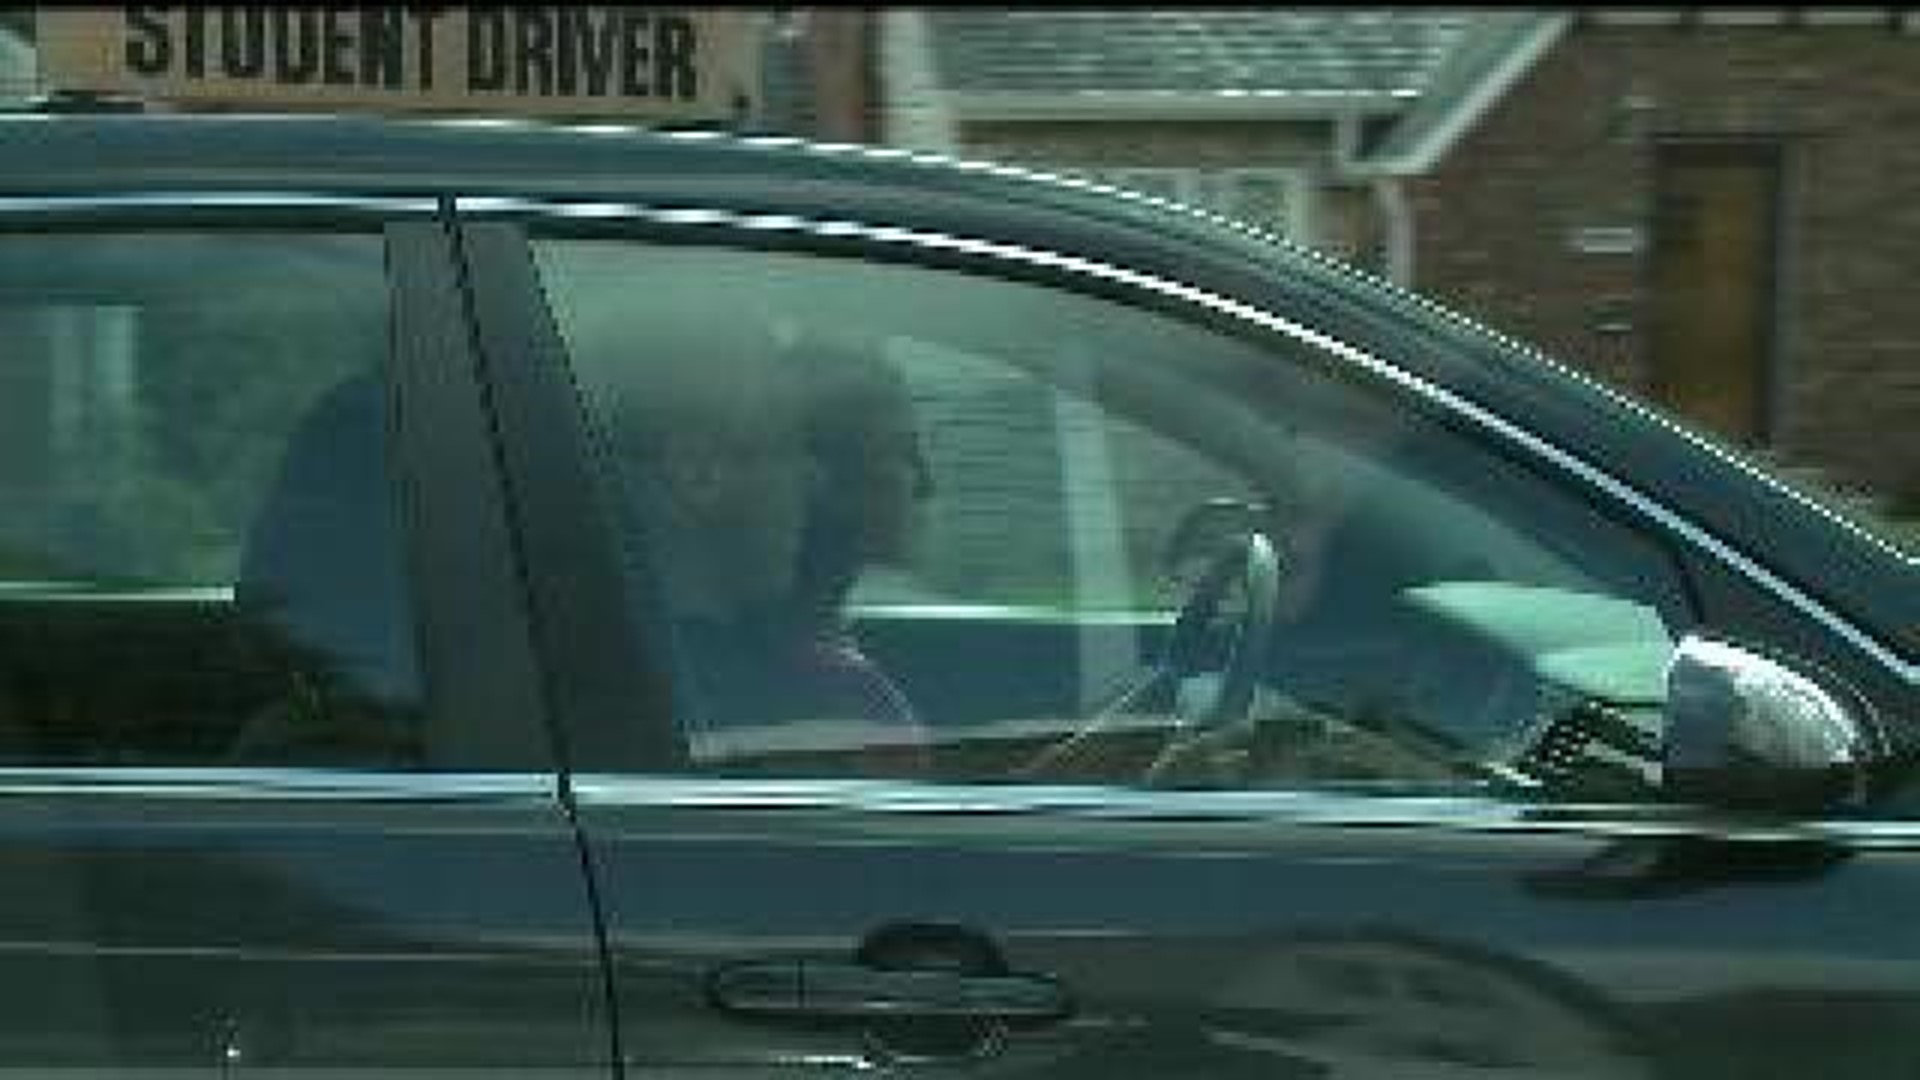 Teen Driving Deaths Down in Illinois